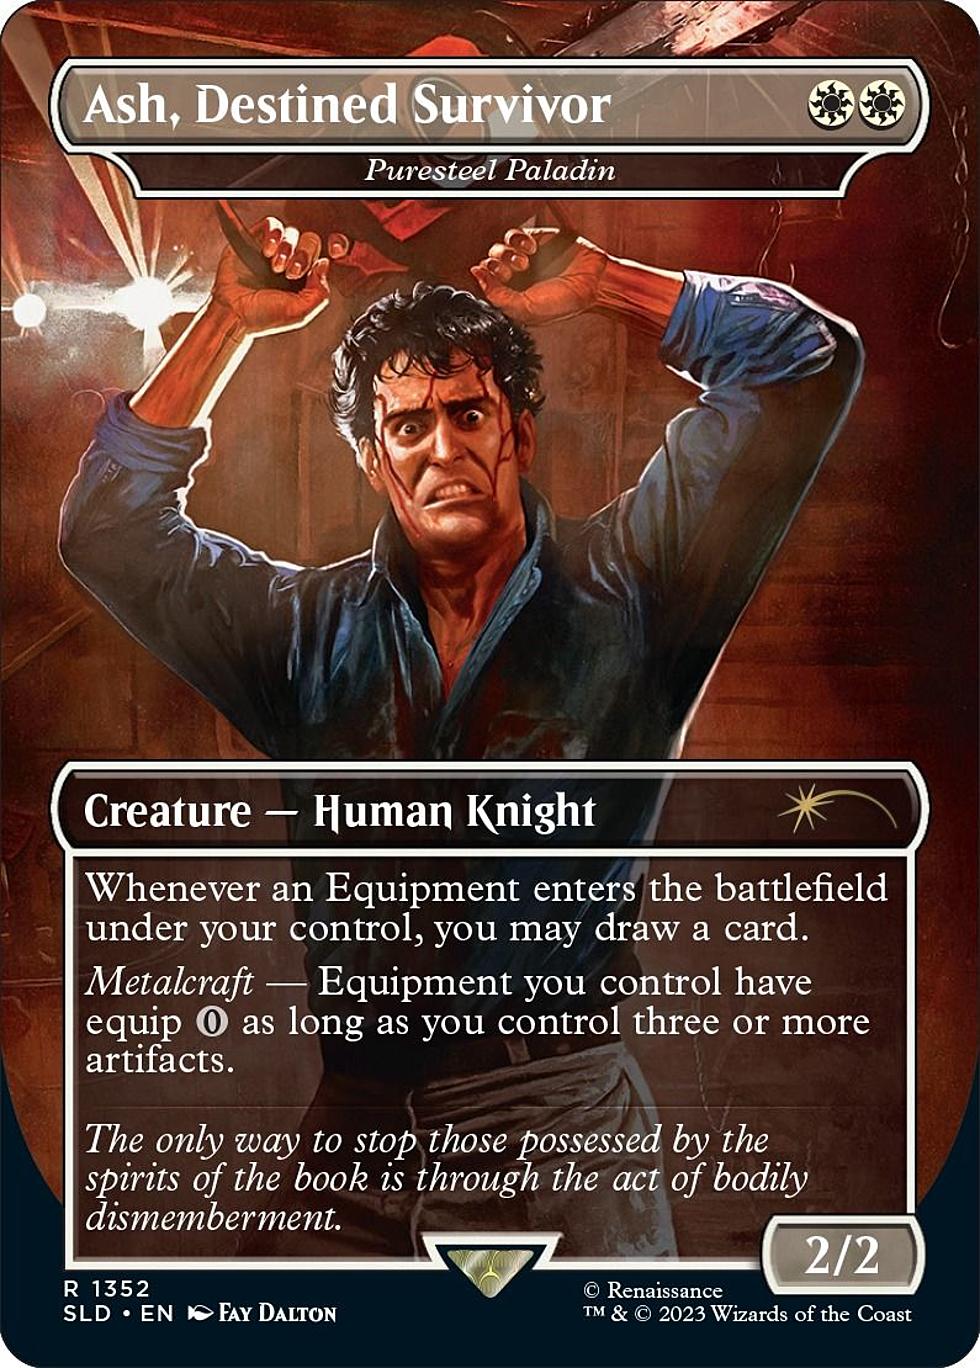 Magic: The Gathering is getting Evil Dead, Princess Bride and